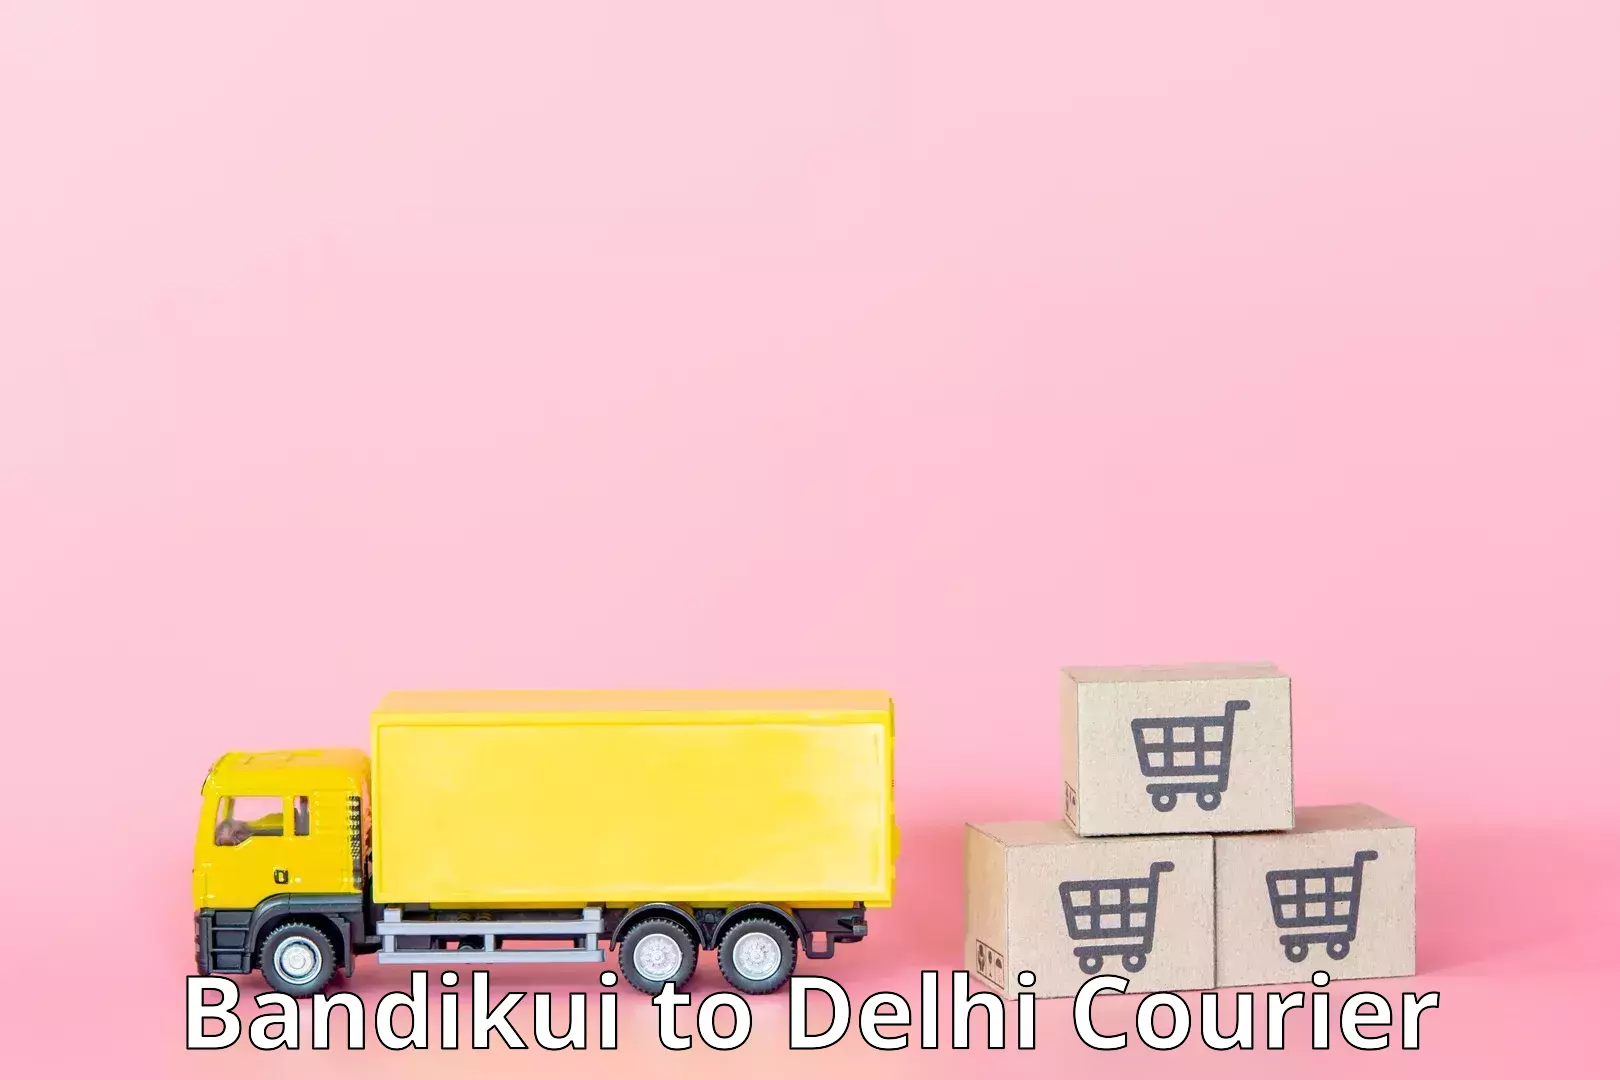 State-of-the-art courier technology Bandikui to Jhilmil